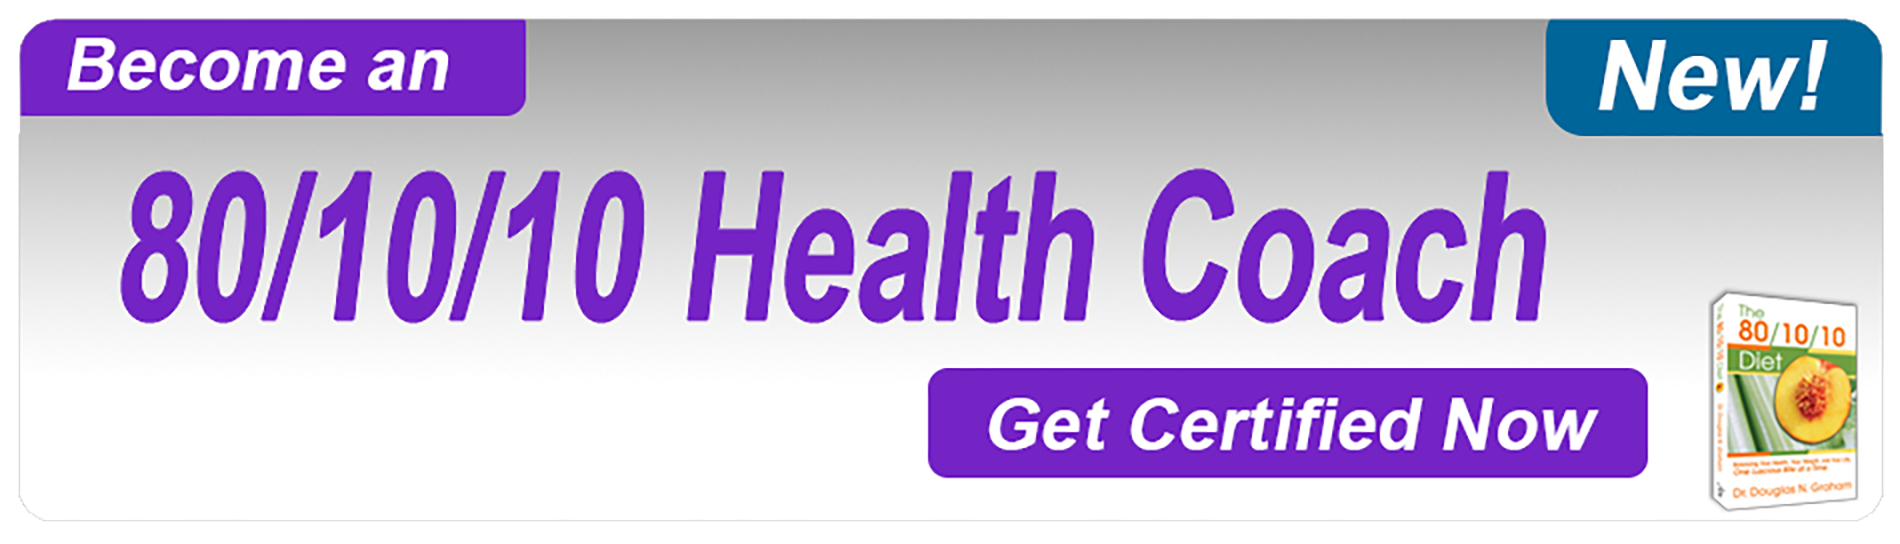 Become an 80/10/10 Health Coach – Get Certified Now!